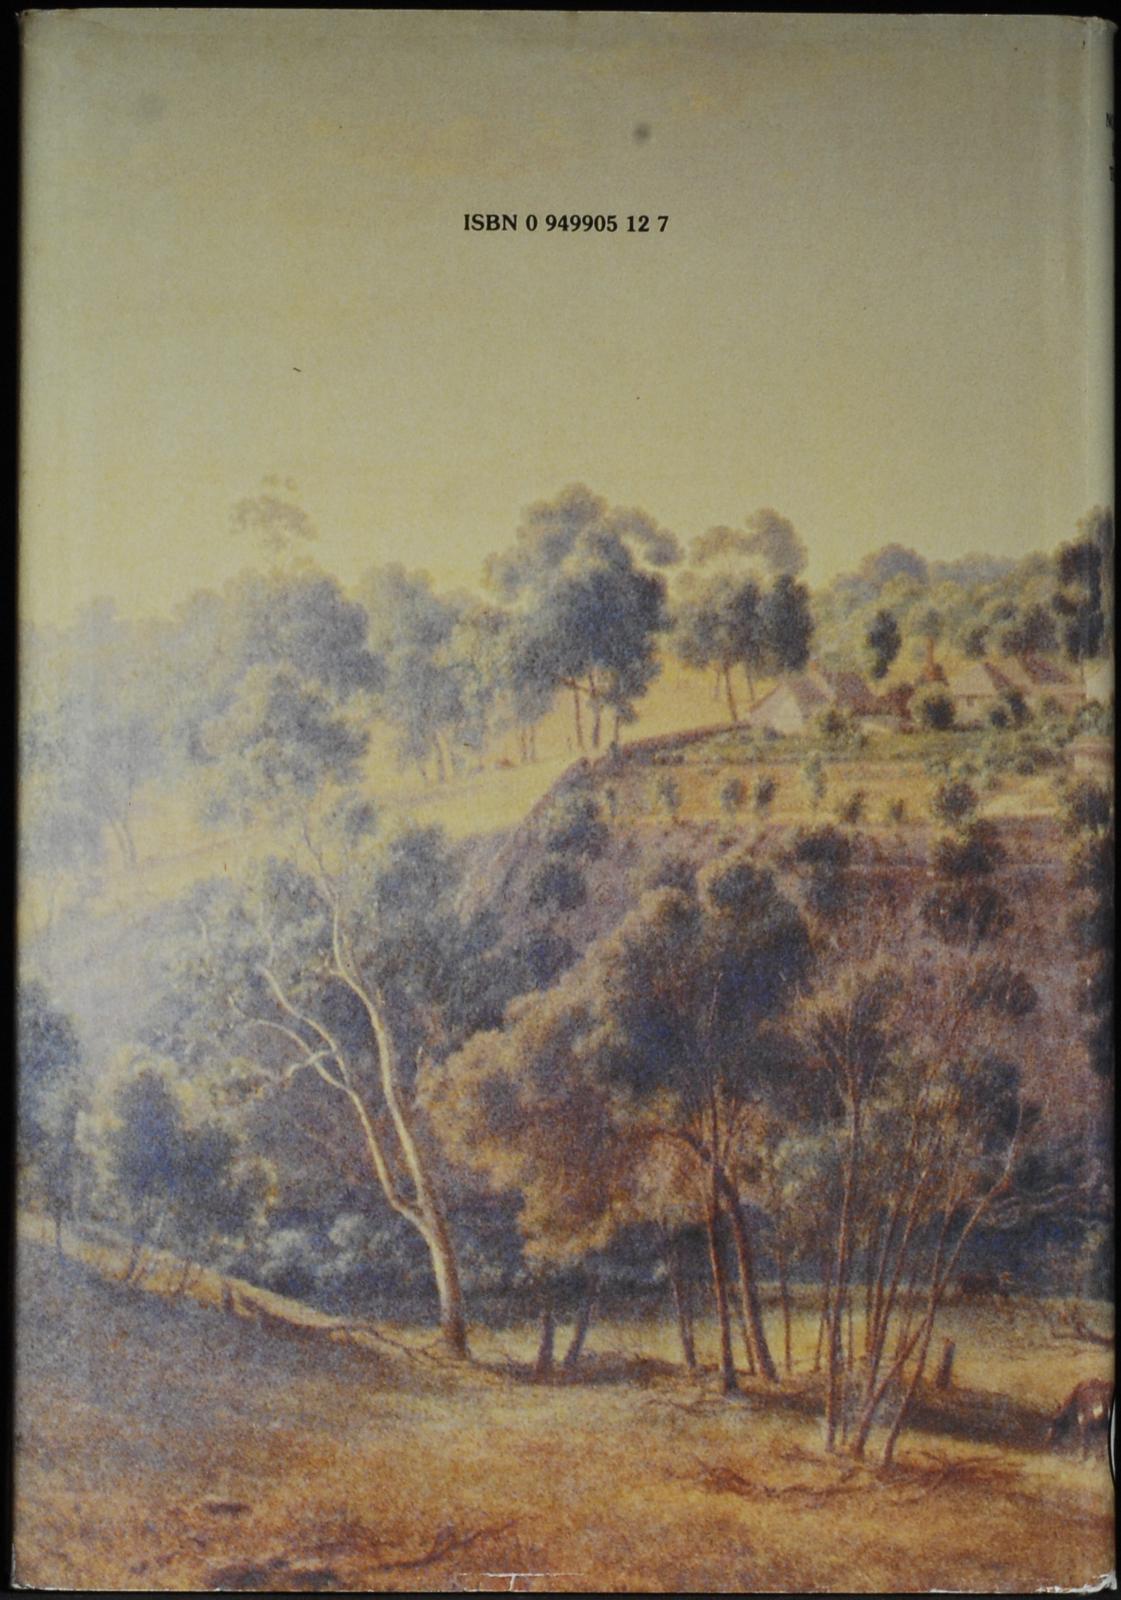 mbb006976b_-_Lemon_Andrew_-_The_Northcote_Side_Of_The_River_-_Contains_Illustrations.jpg